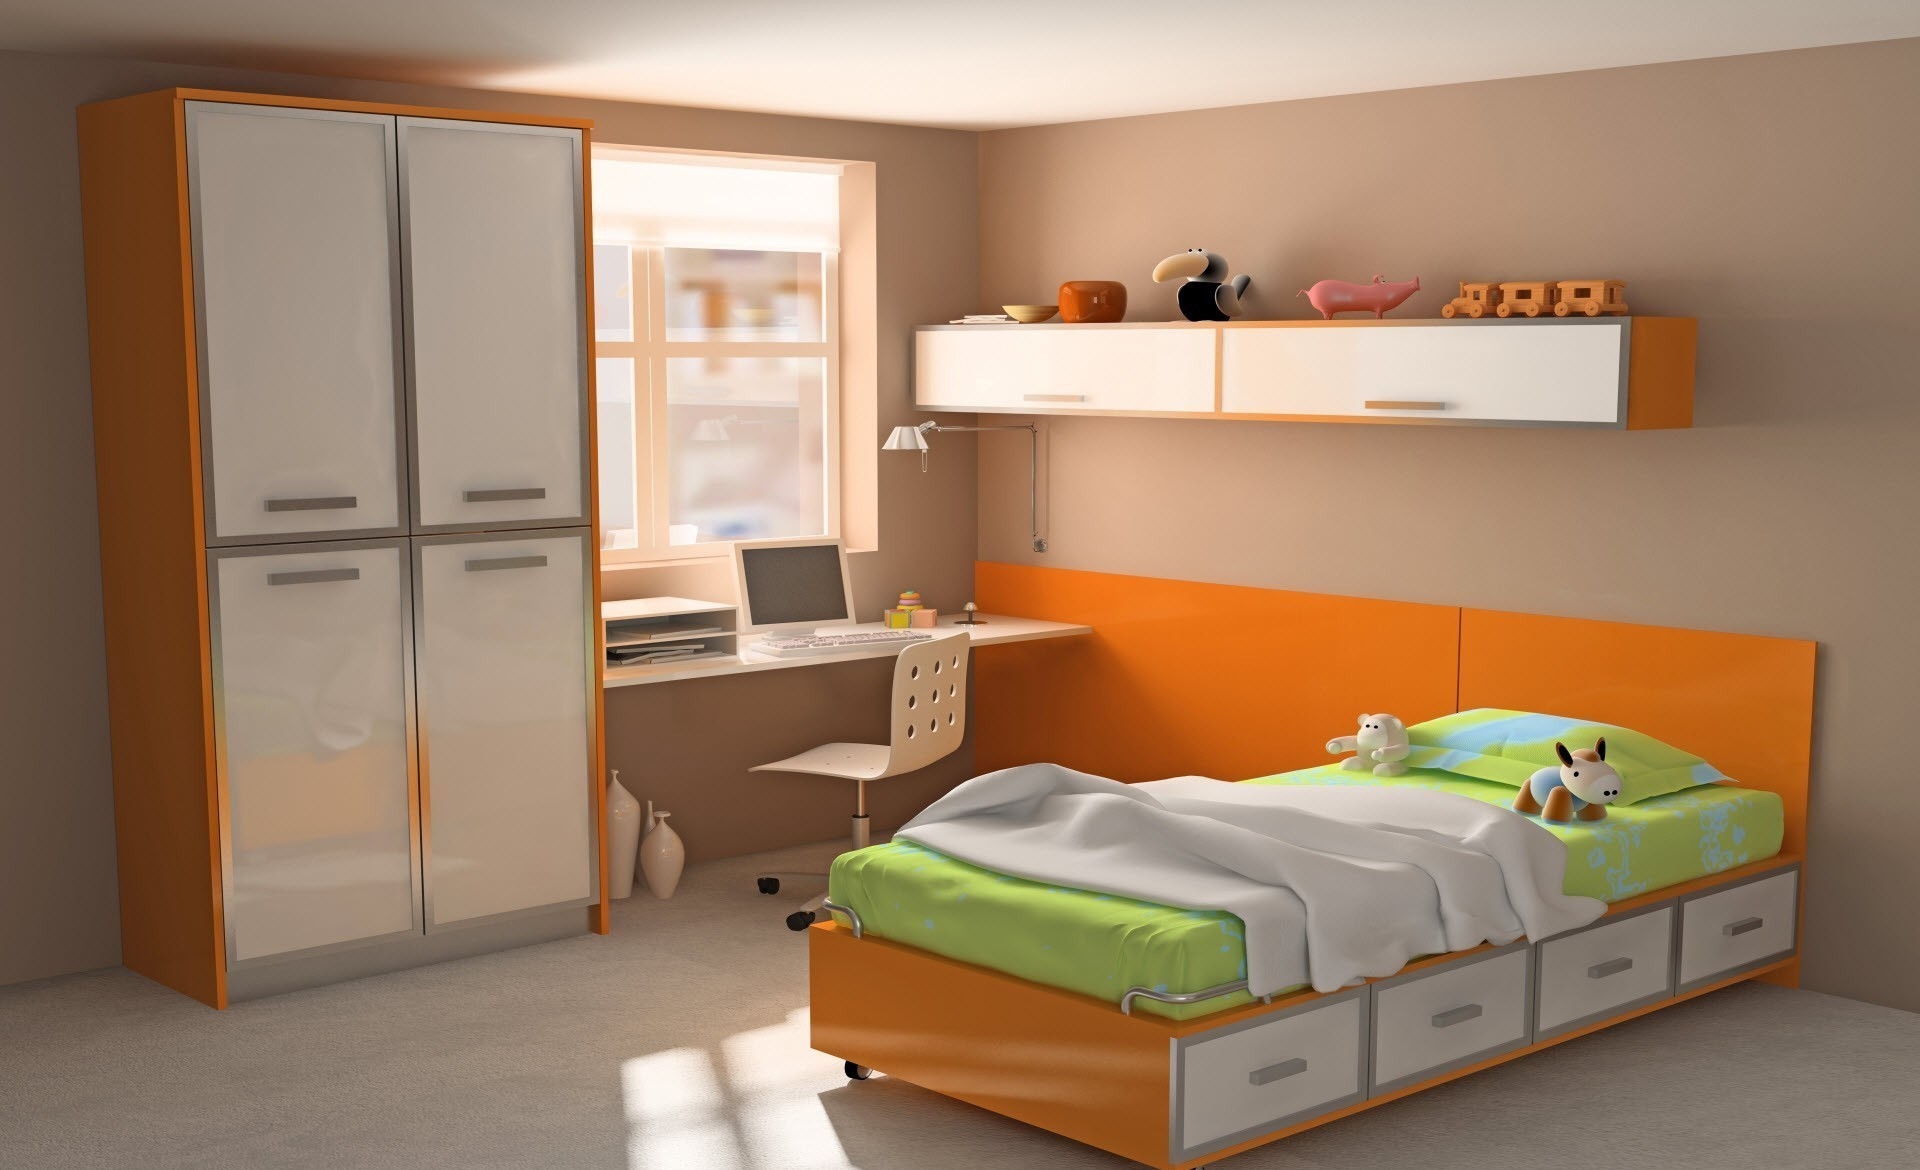 122318 download wallpaper toys, interior, orange, miscellanea, miscellaneous, design, table, room, style, bed, brightly, computer, cupboard, apartment, flat, colorfully, graphically screensavers and pictures for free